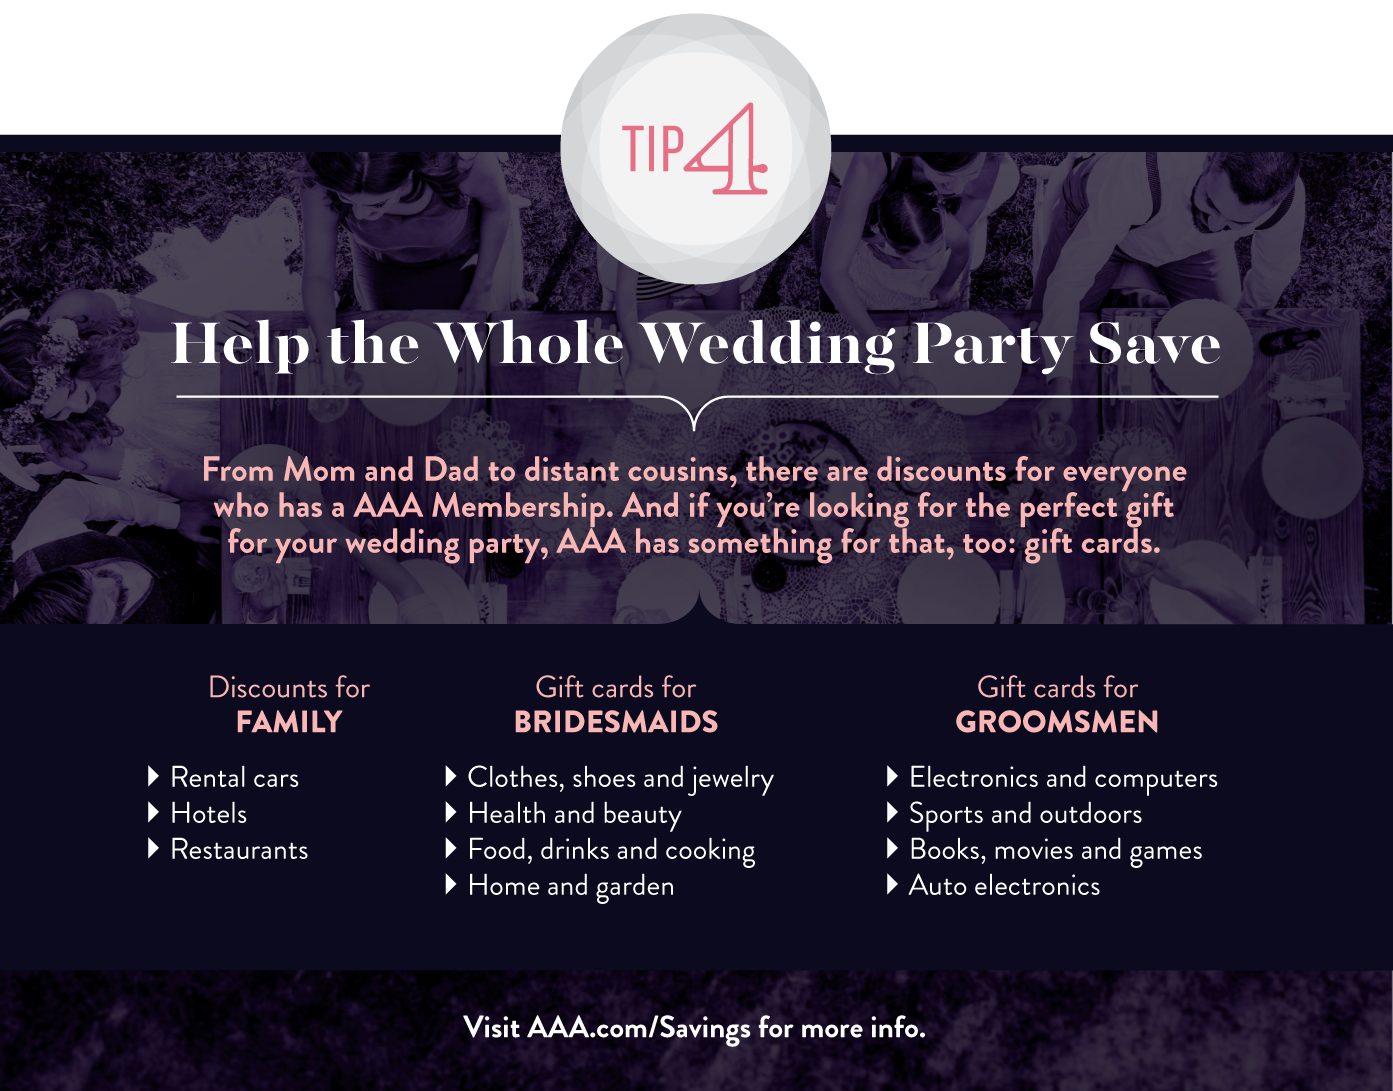 Ways for the wedding party to save money.